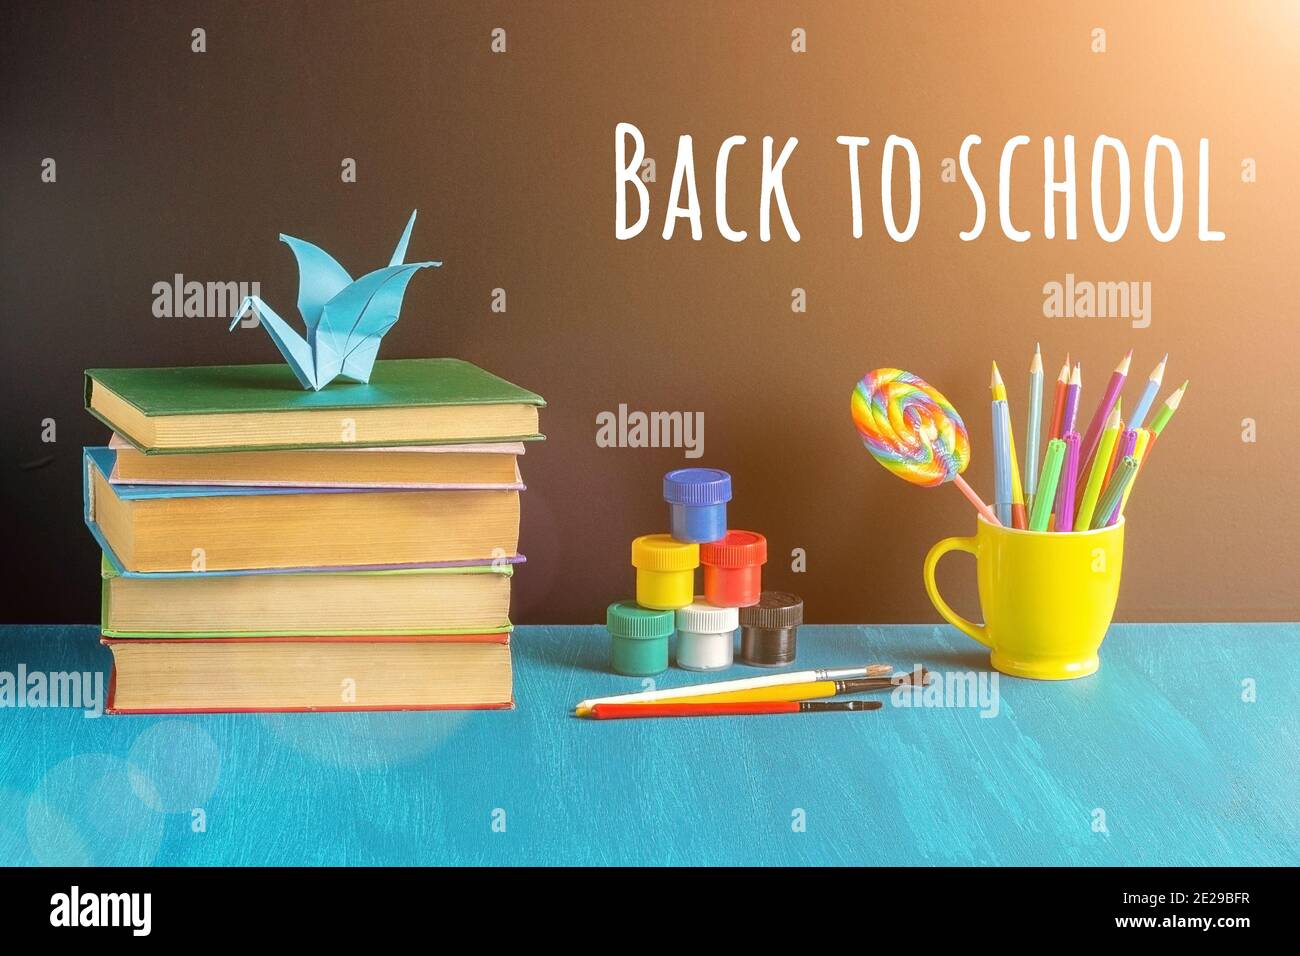 Back to school text on black chalkboard, books, stationery in yellow mug, paint gouache and origami crane on blue table. Concept Education and Pupils Stock Photo